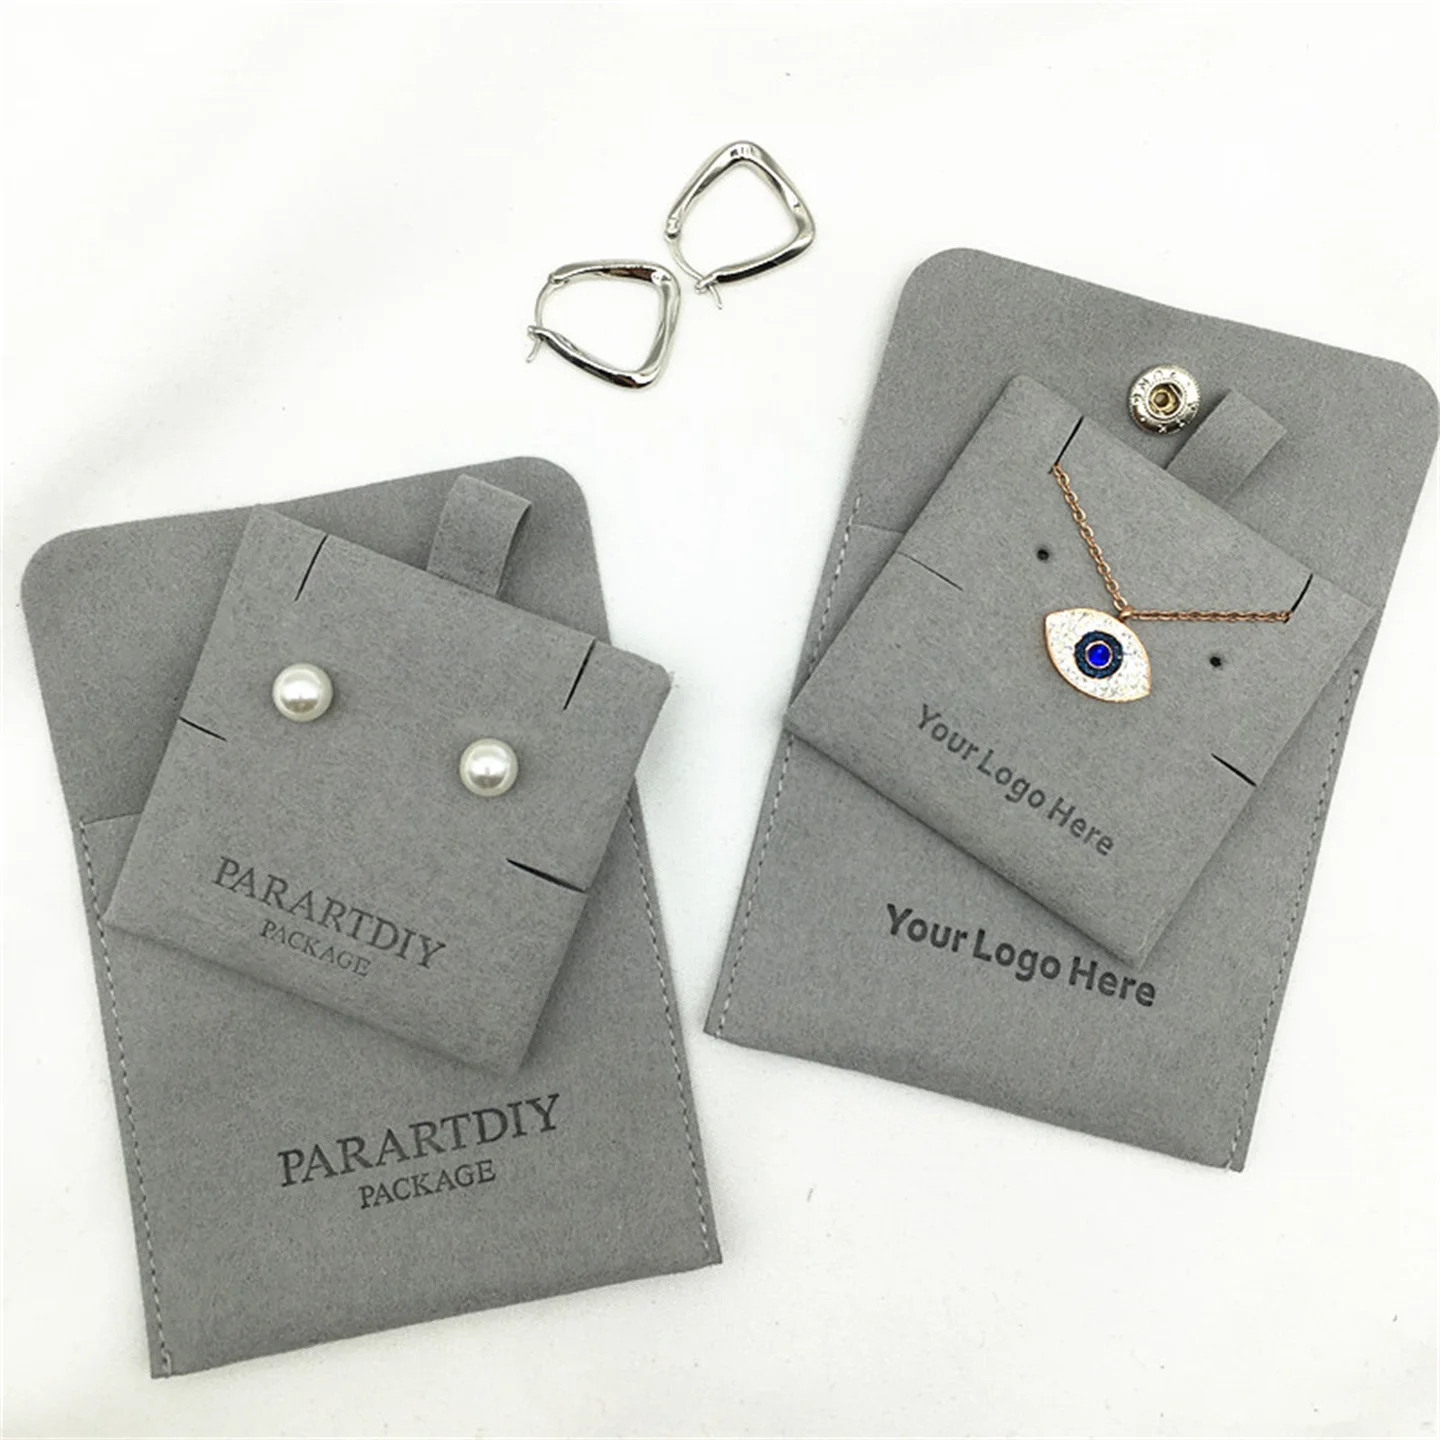 50/500 dark gray microfiber jewelry bags personalized jewelry packaging bags with customized logo fashion with buttons 2 buttons car remote key shell key housing fit for citroen c1 c2 c3 c4 xsara picasso with 307 blade